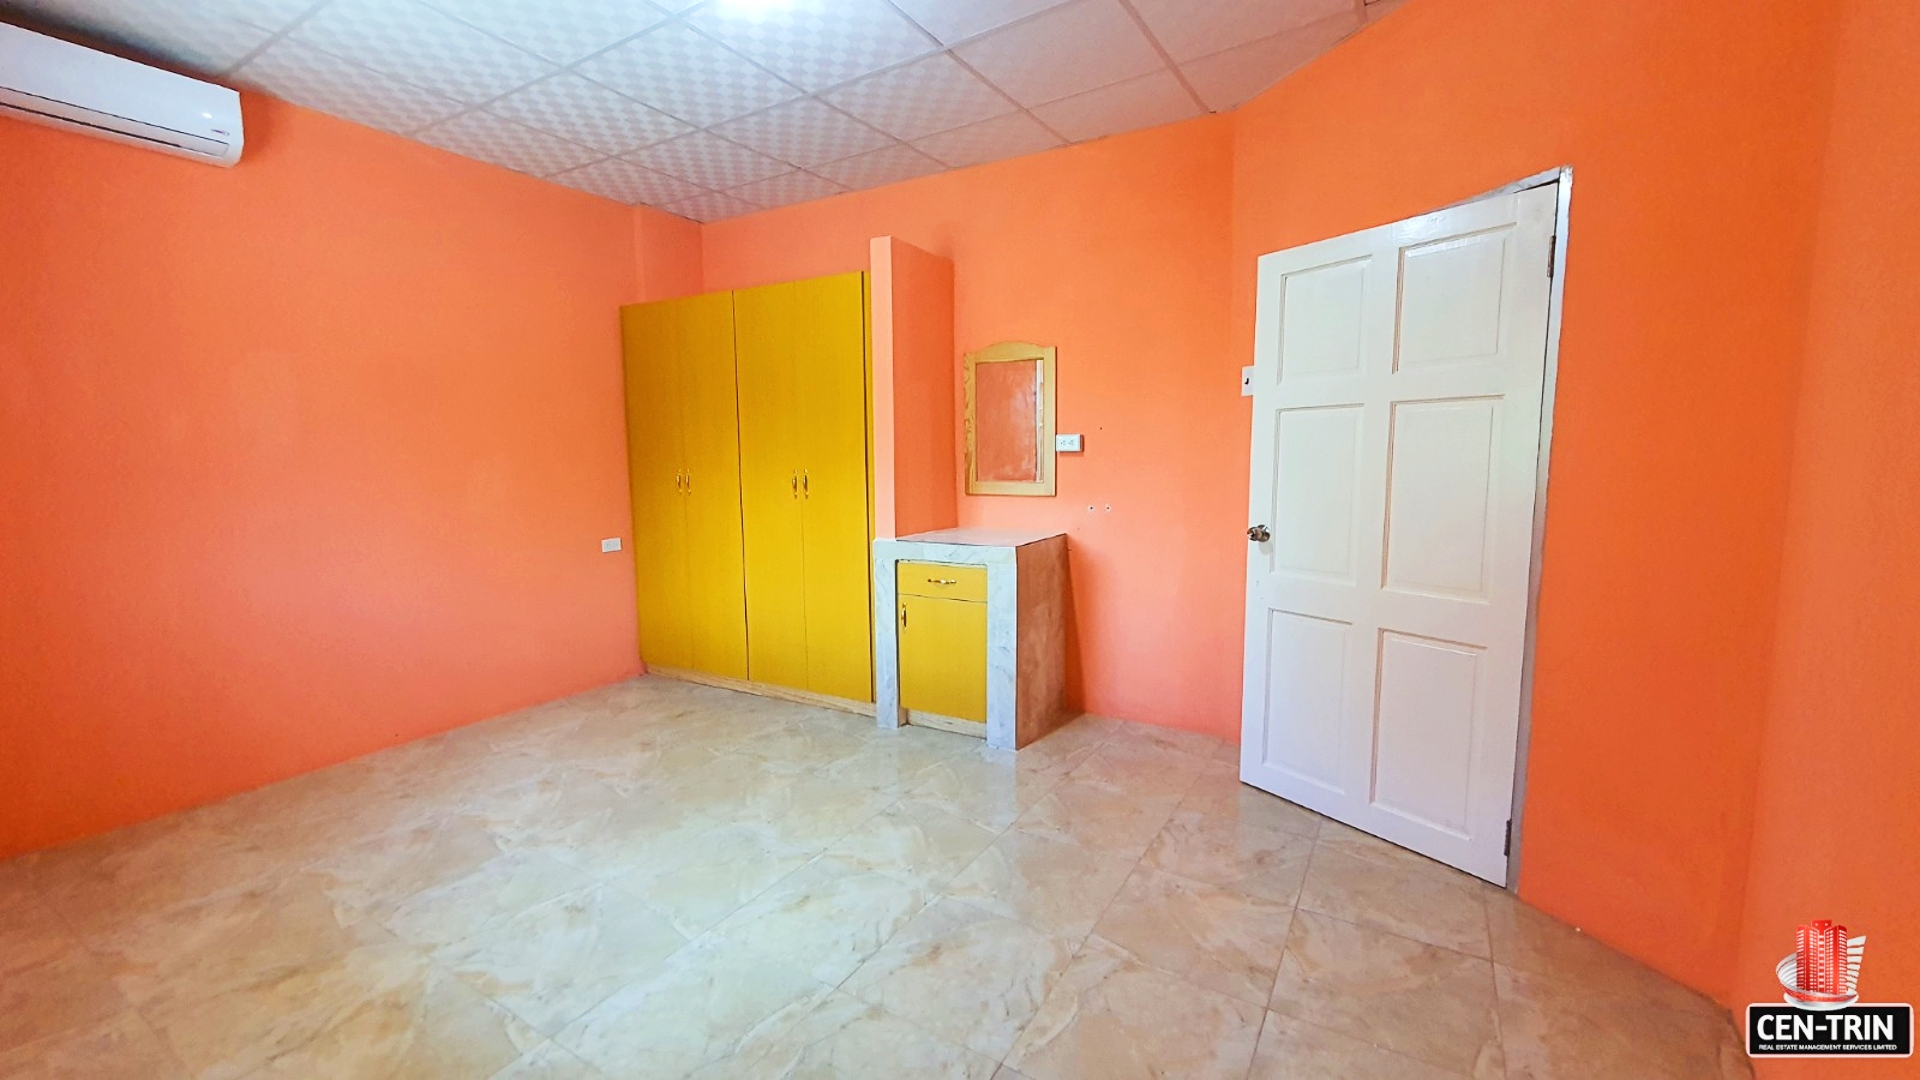 Bedroom interior with orange walls, a white wardrobe with mirrored doors, and a closed white door.